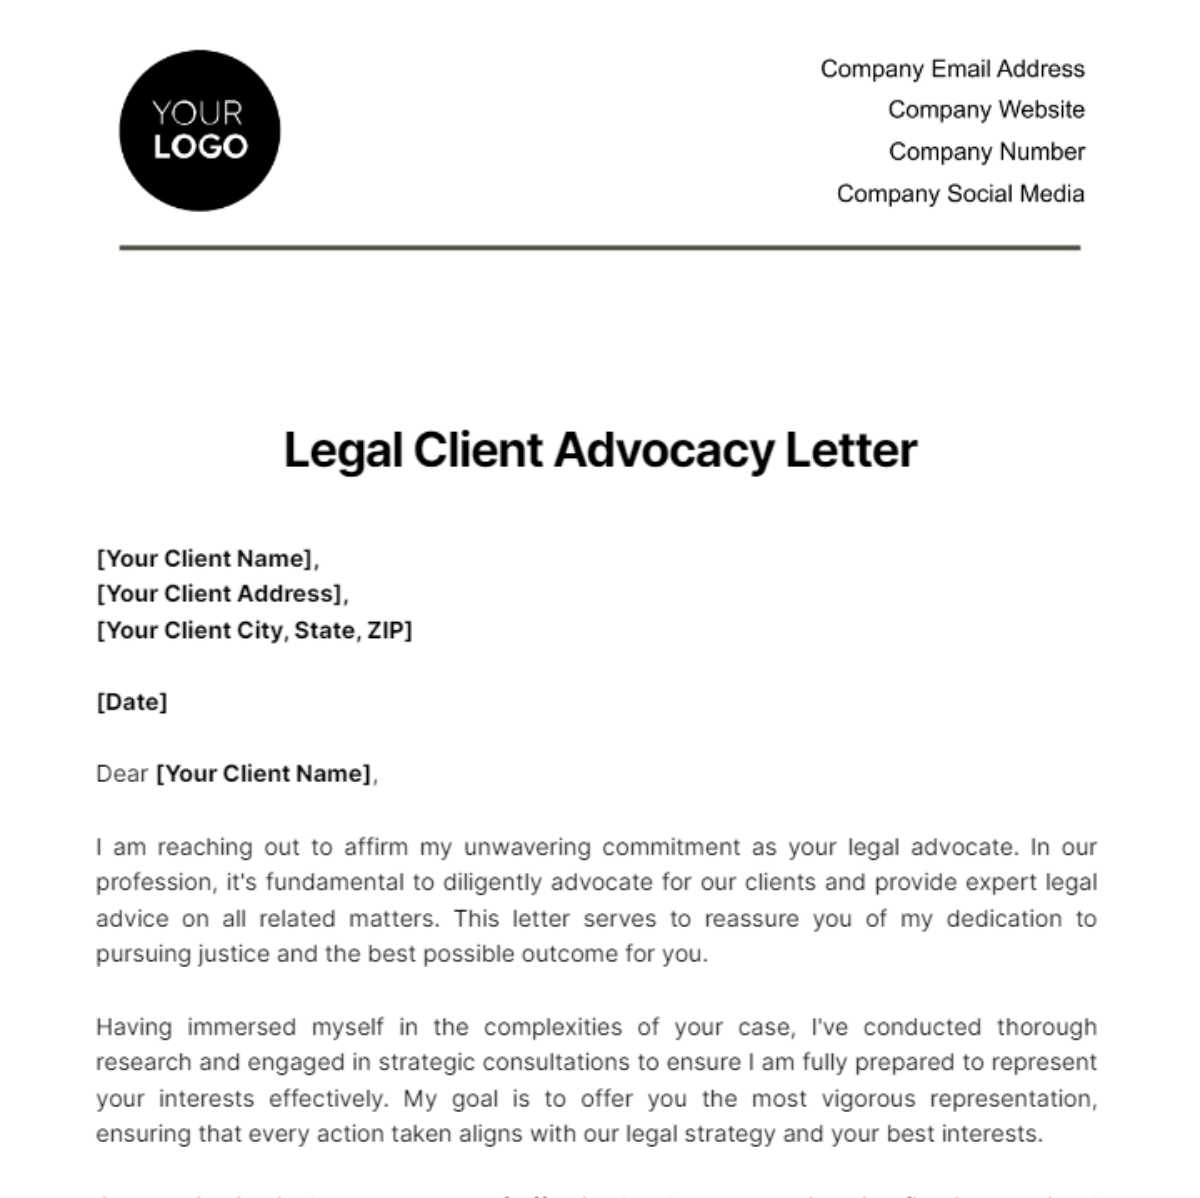 Free Legal Client Advocacy Letter Template